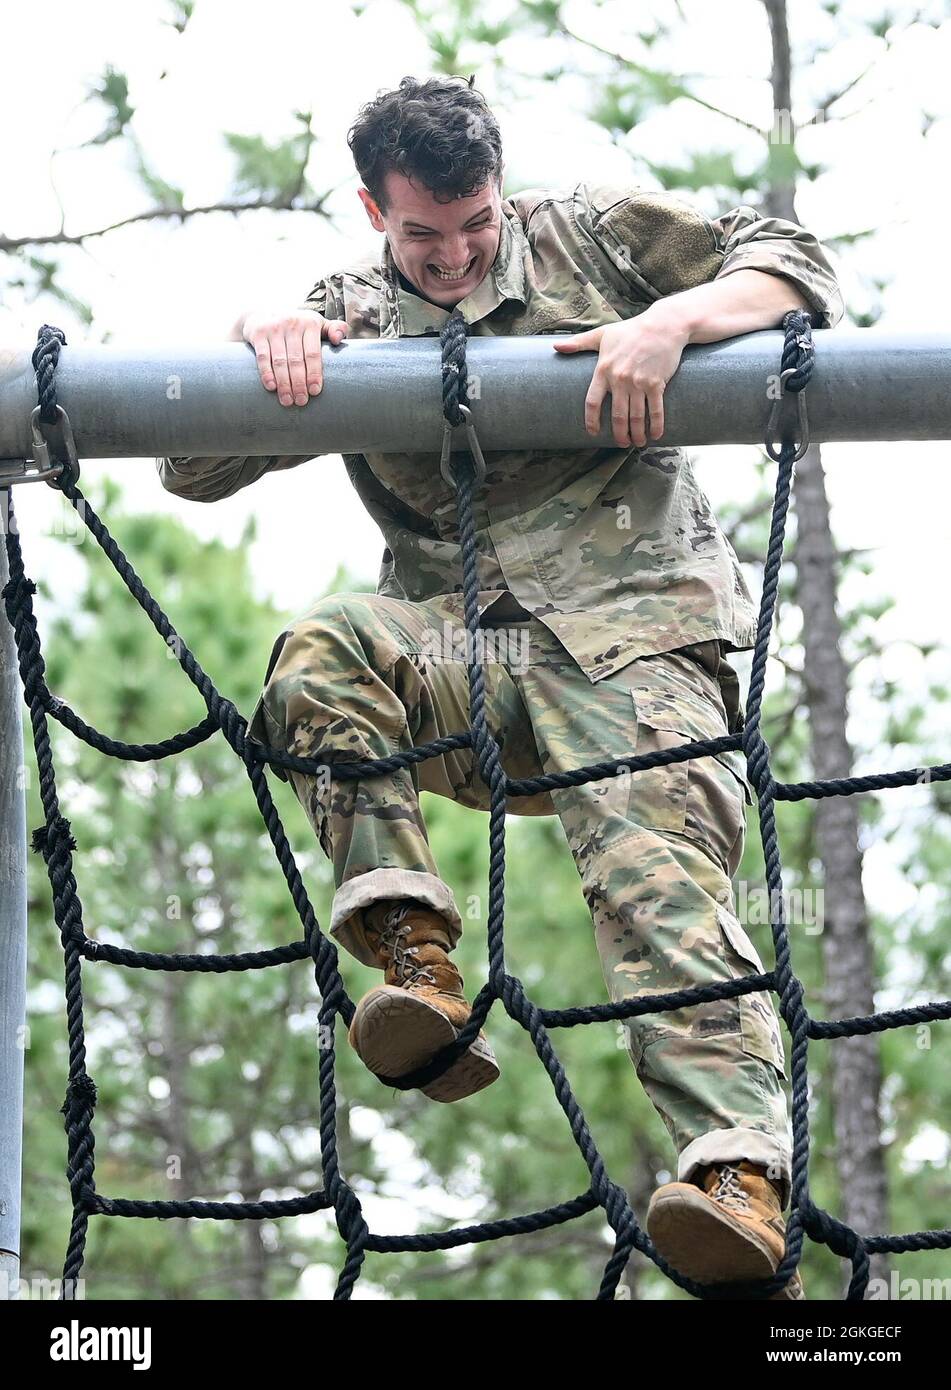 A Soldier from Support Battalion, 1st Special Warfare Training Group (Airborne) climbs a cargo net during the battalion's Commander's Cup competition at Fort Bragg, North Carolina April 15, 2021. The Soldiers from each company competed in a ruck march, obstacle course, land navigation, Jeopardy-themed trivia contest and stress shoot with pistols and rifles. Stock Photo